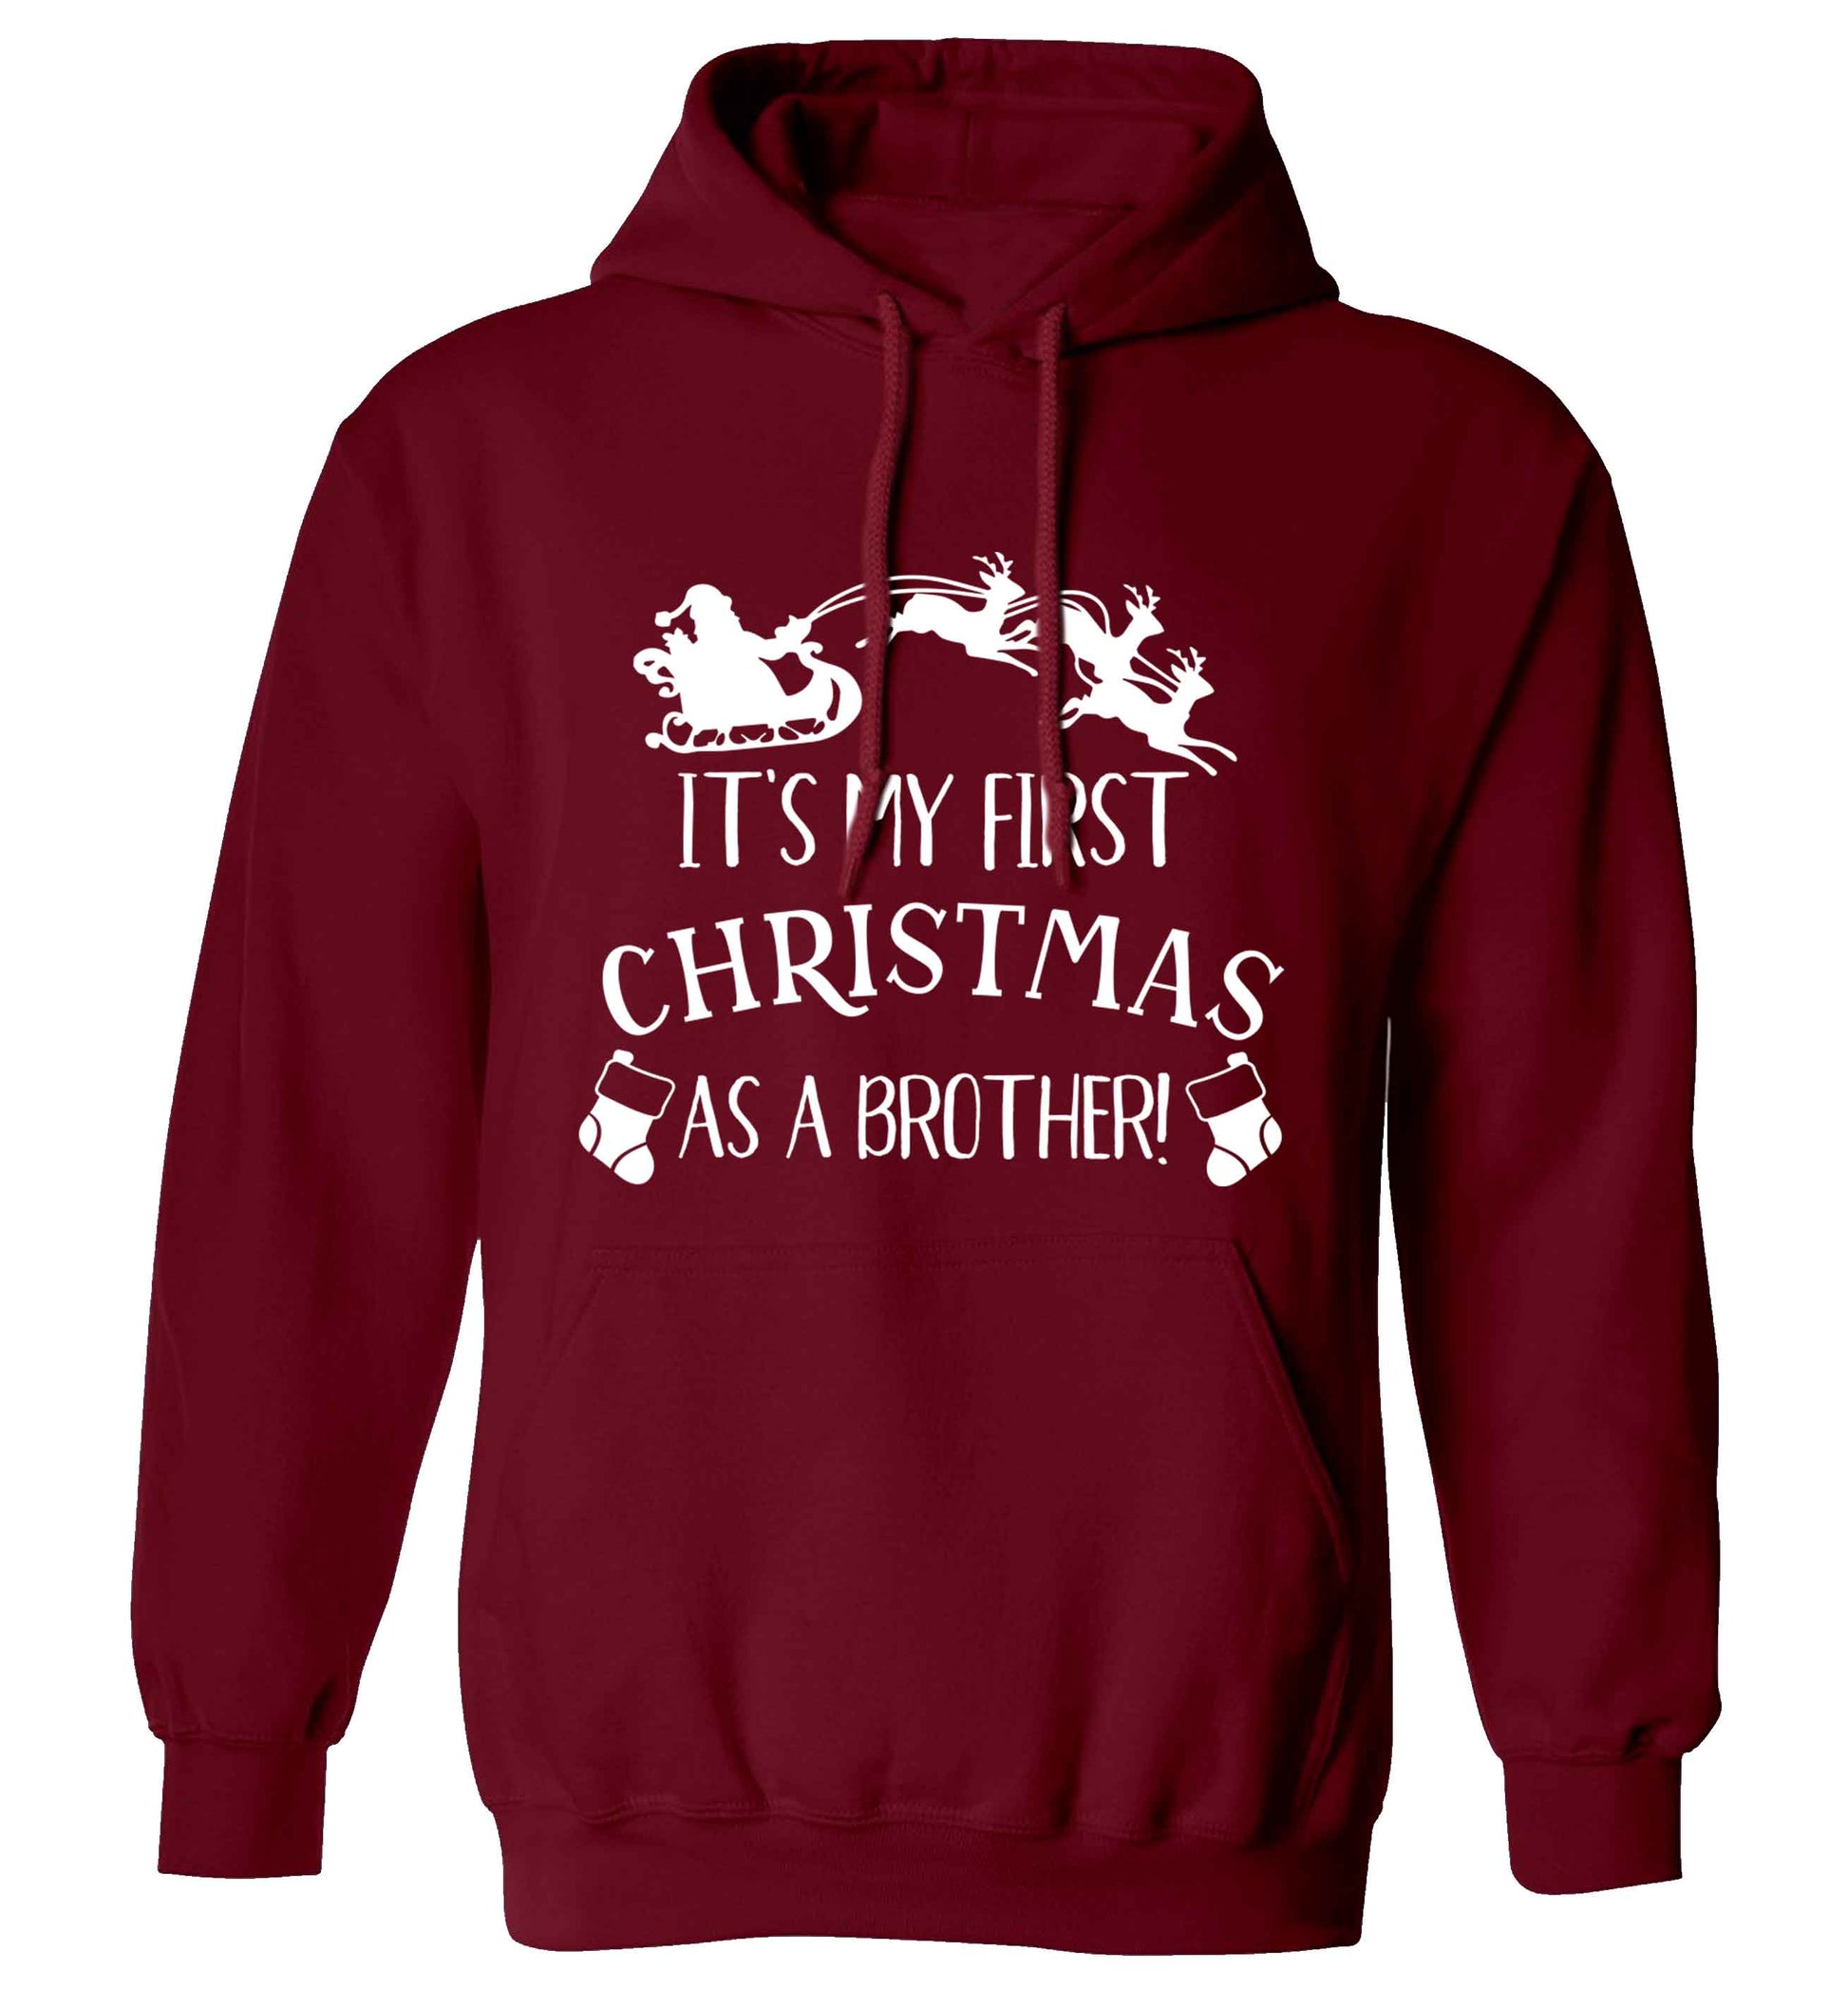 It's my first Christmas as a brother! adults unisex maroon hoodie 2XL